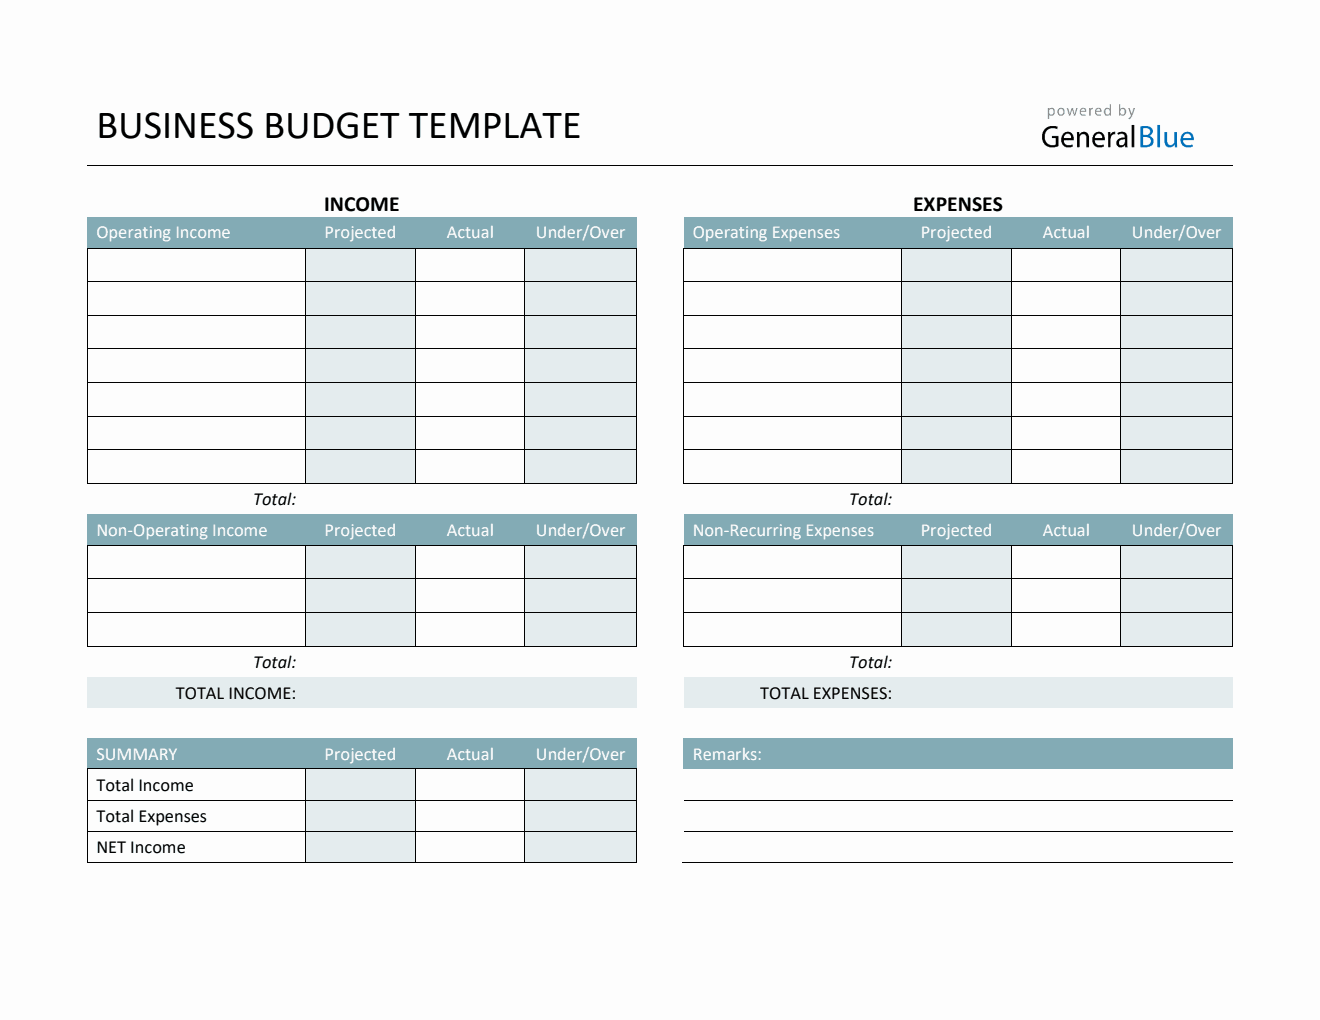 Printable Business Budget Template in PDF (Colorful)